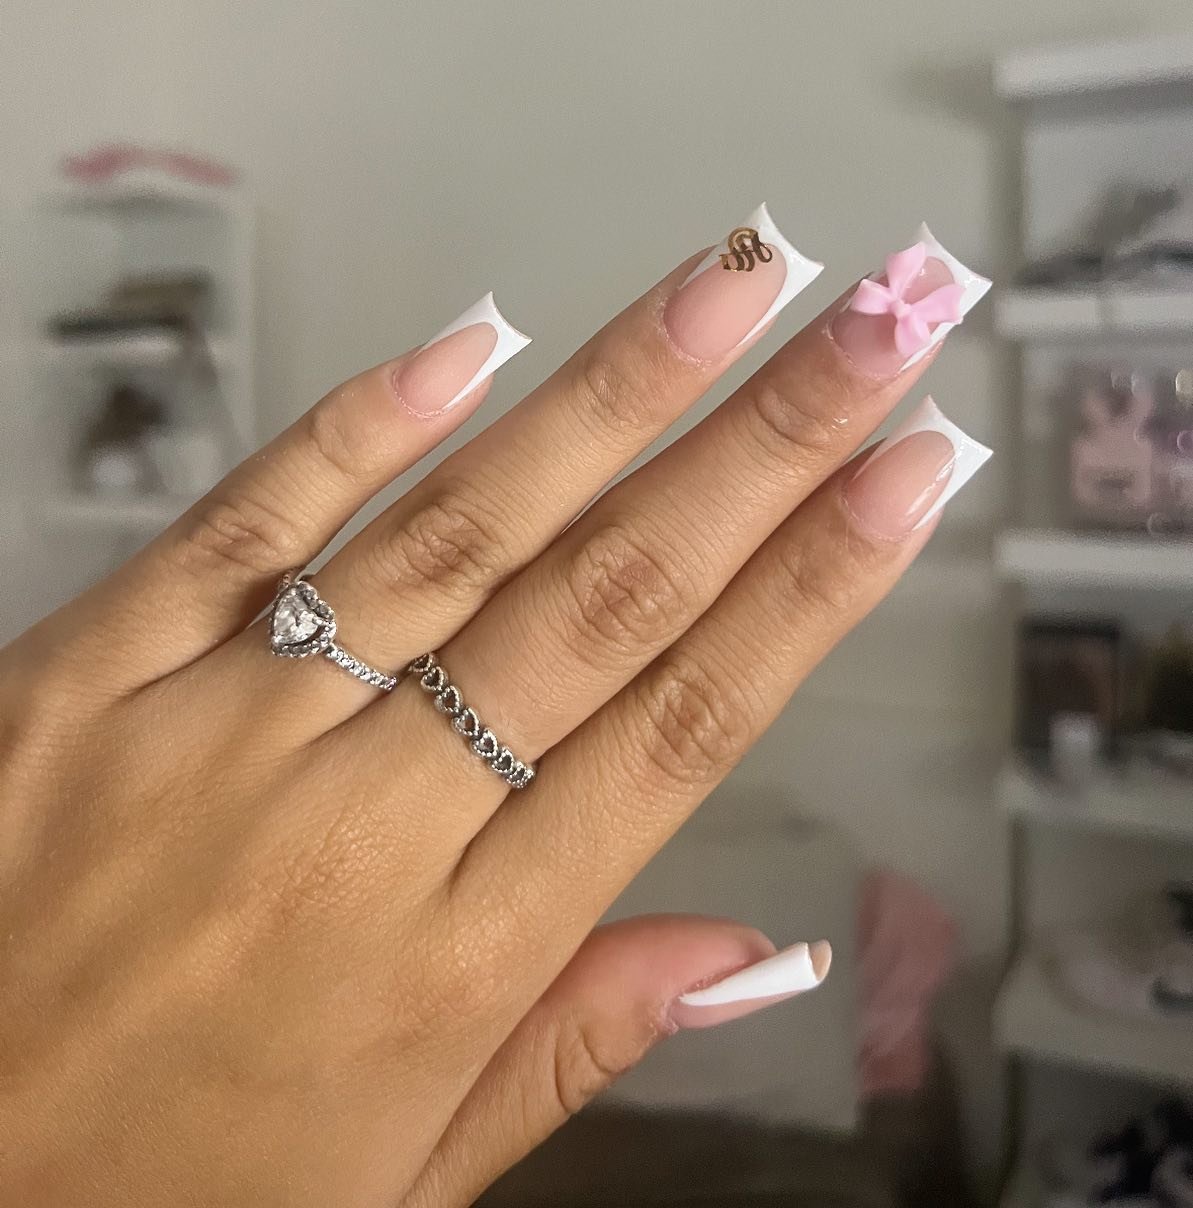 35 - Picture of Acrylic Nails